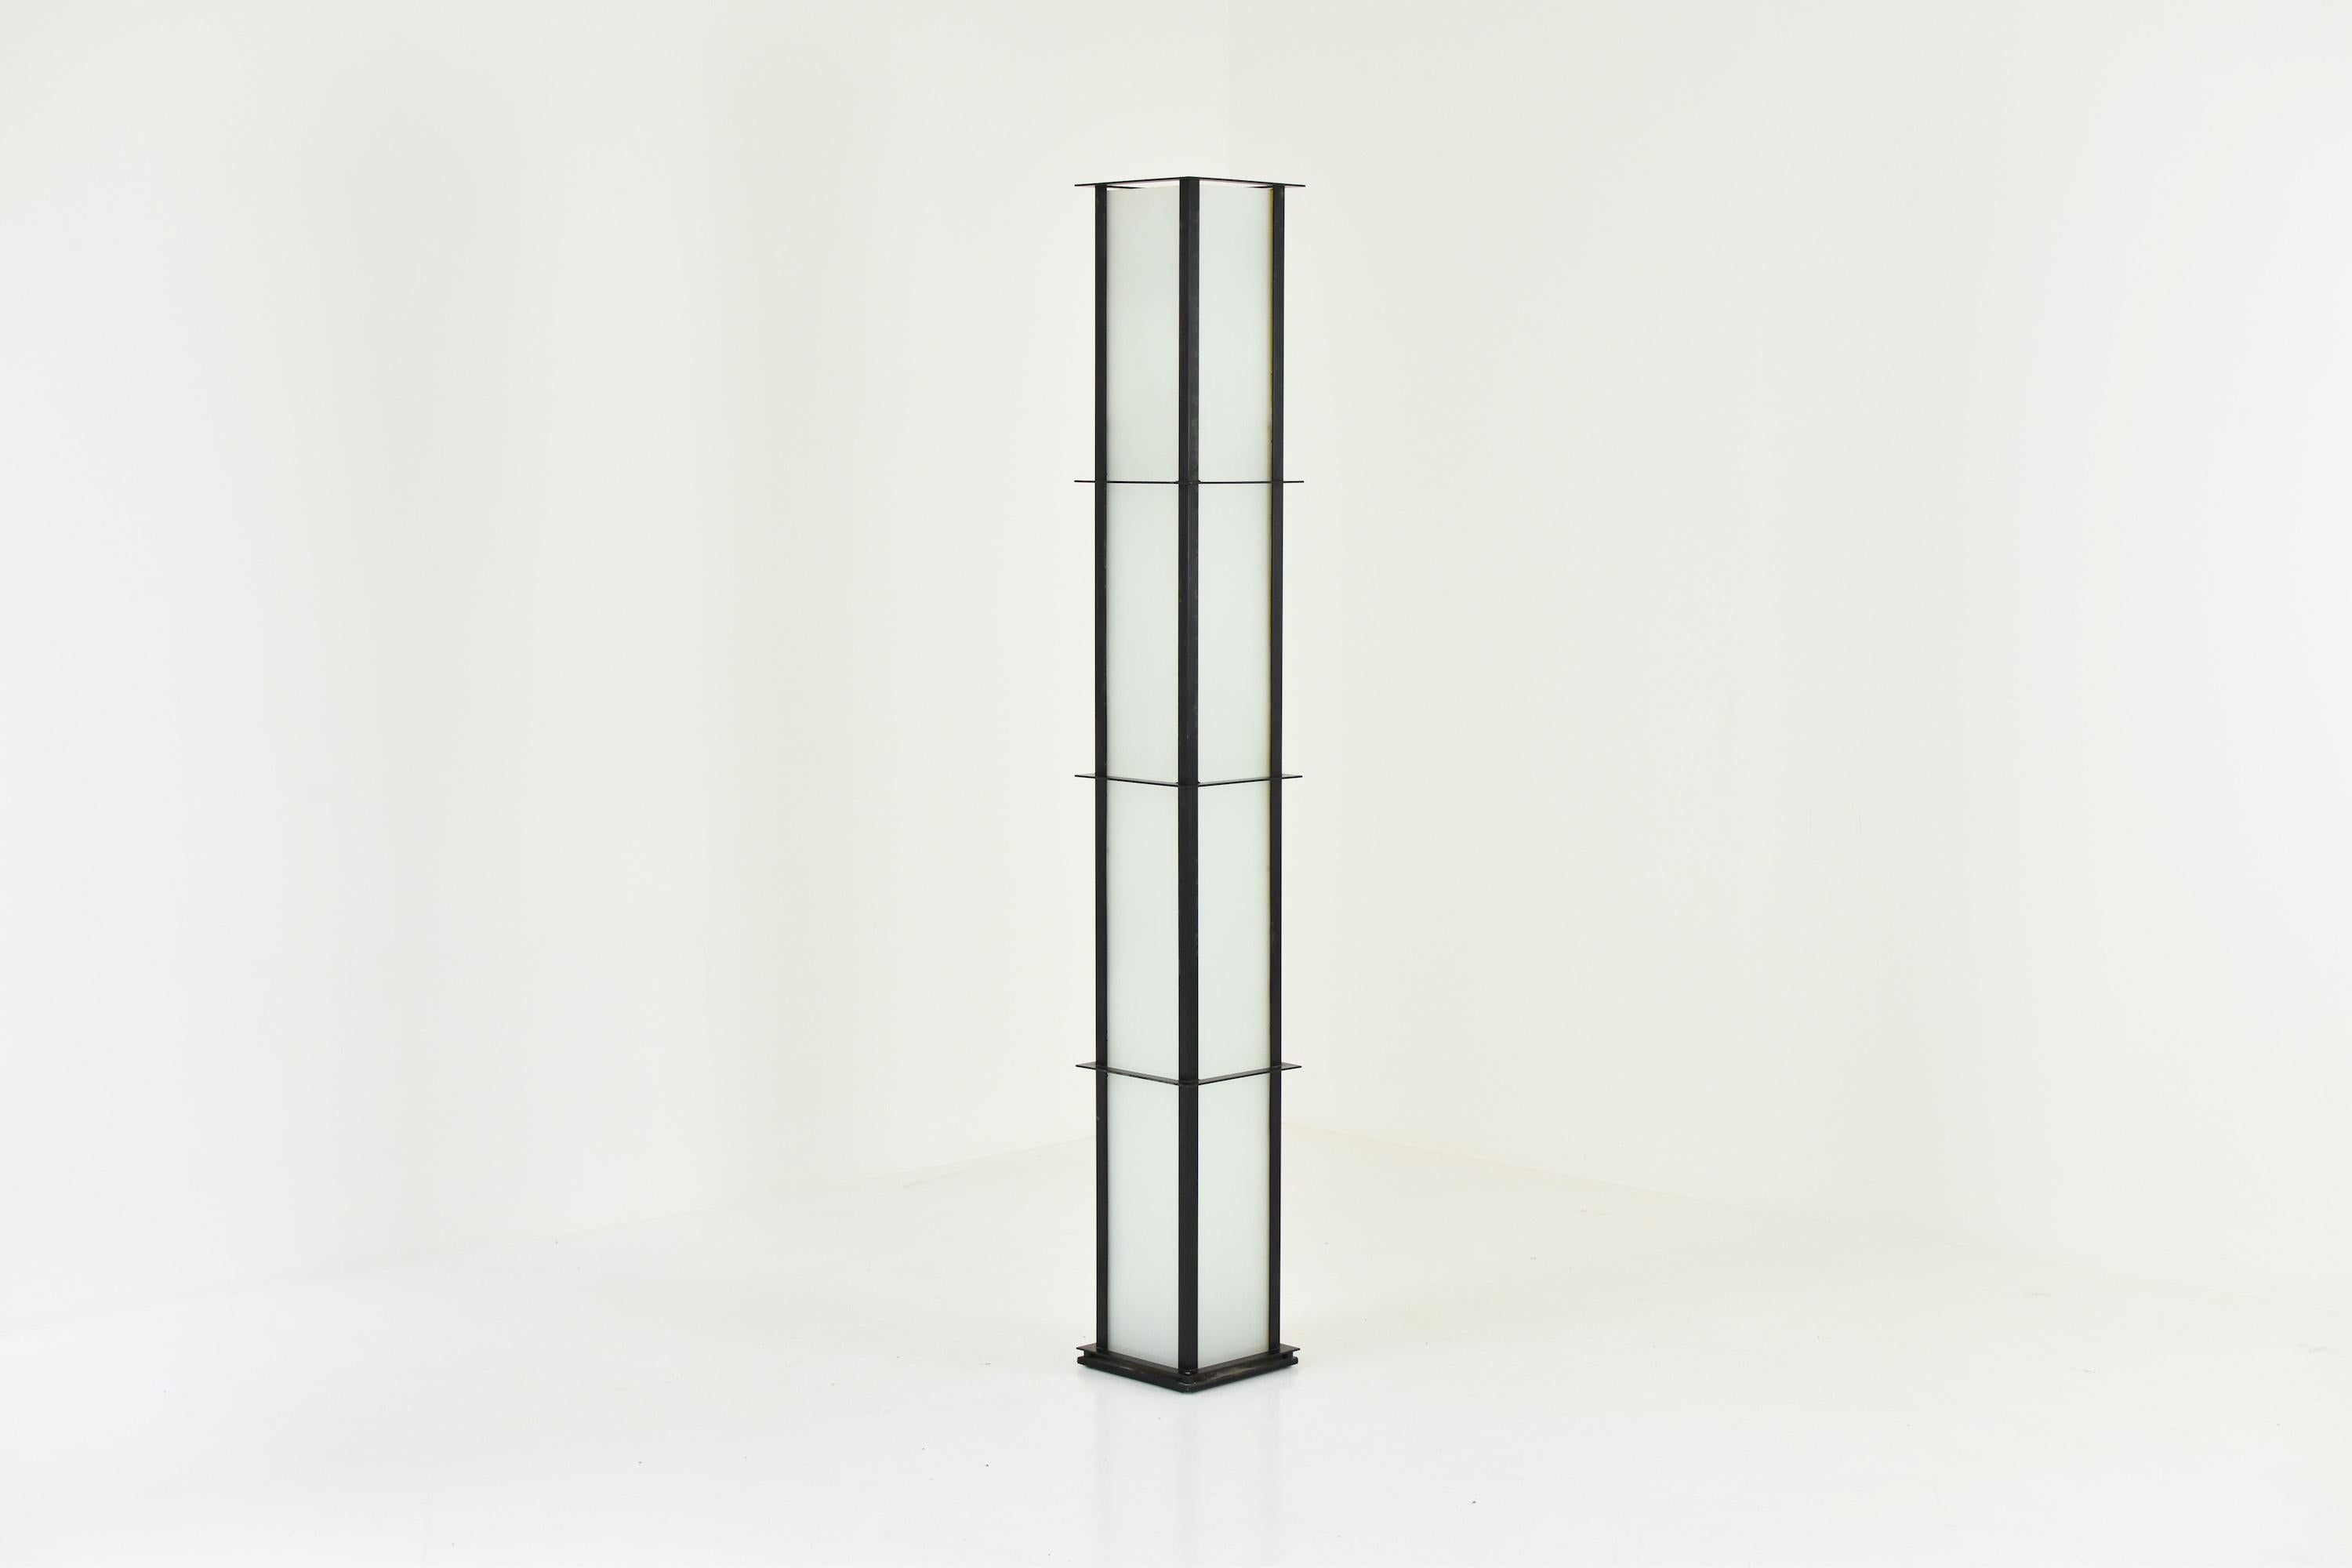 Minimalist opale floor lamp designed by Fabiaan Van Severen, Belgium 1990. This lamp features a black lacquered metal frame and rectangular opale glass panels. Some age related marks on the frame, but overall in a very well presented original